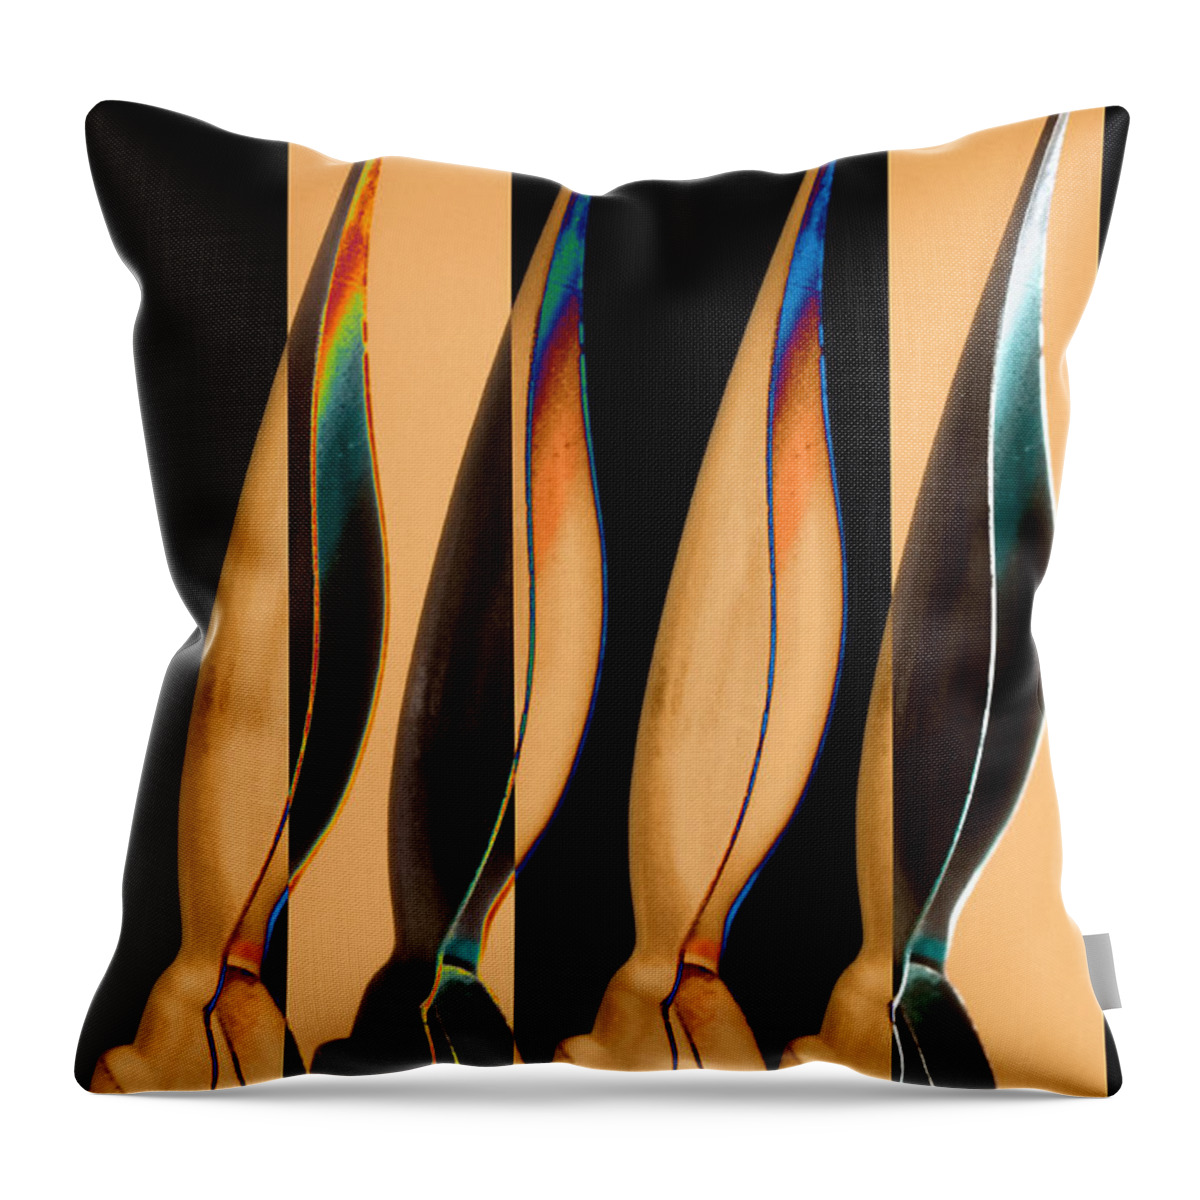 Calligraphy Throw Pillow featuring the photograph Four Pen Nibs by Carol Leigh